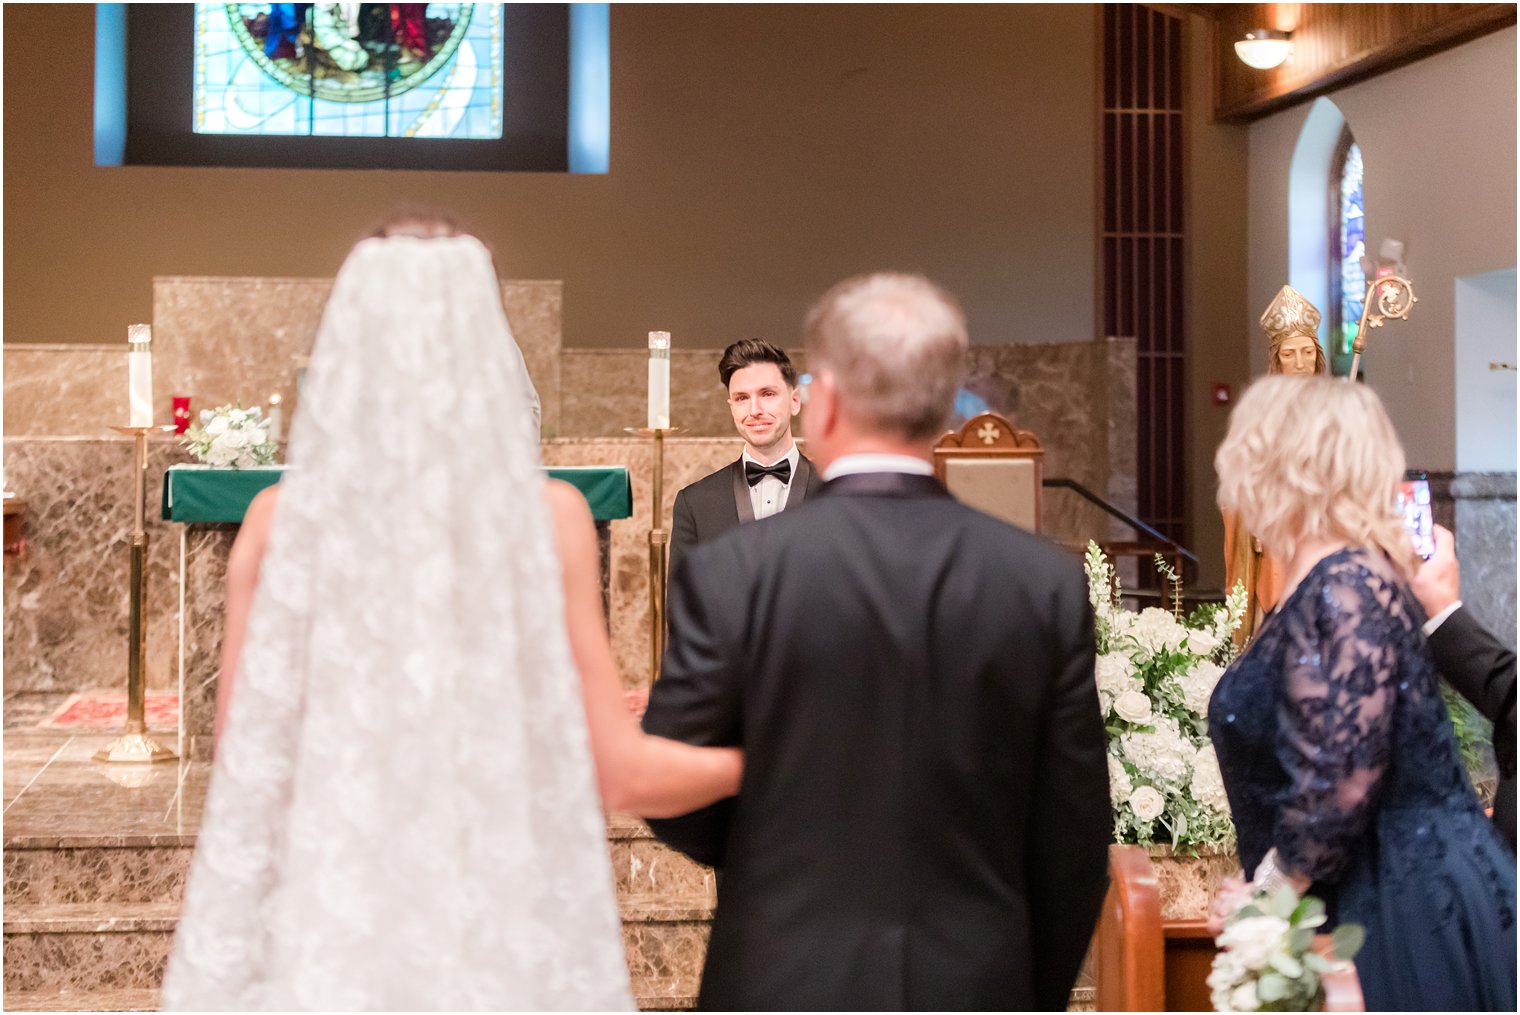 groom cries watching bride enter church for traditional church ceremony in small New Jersey church